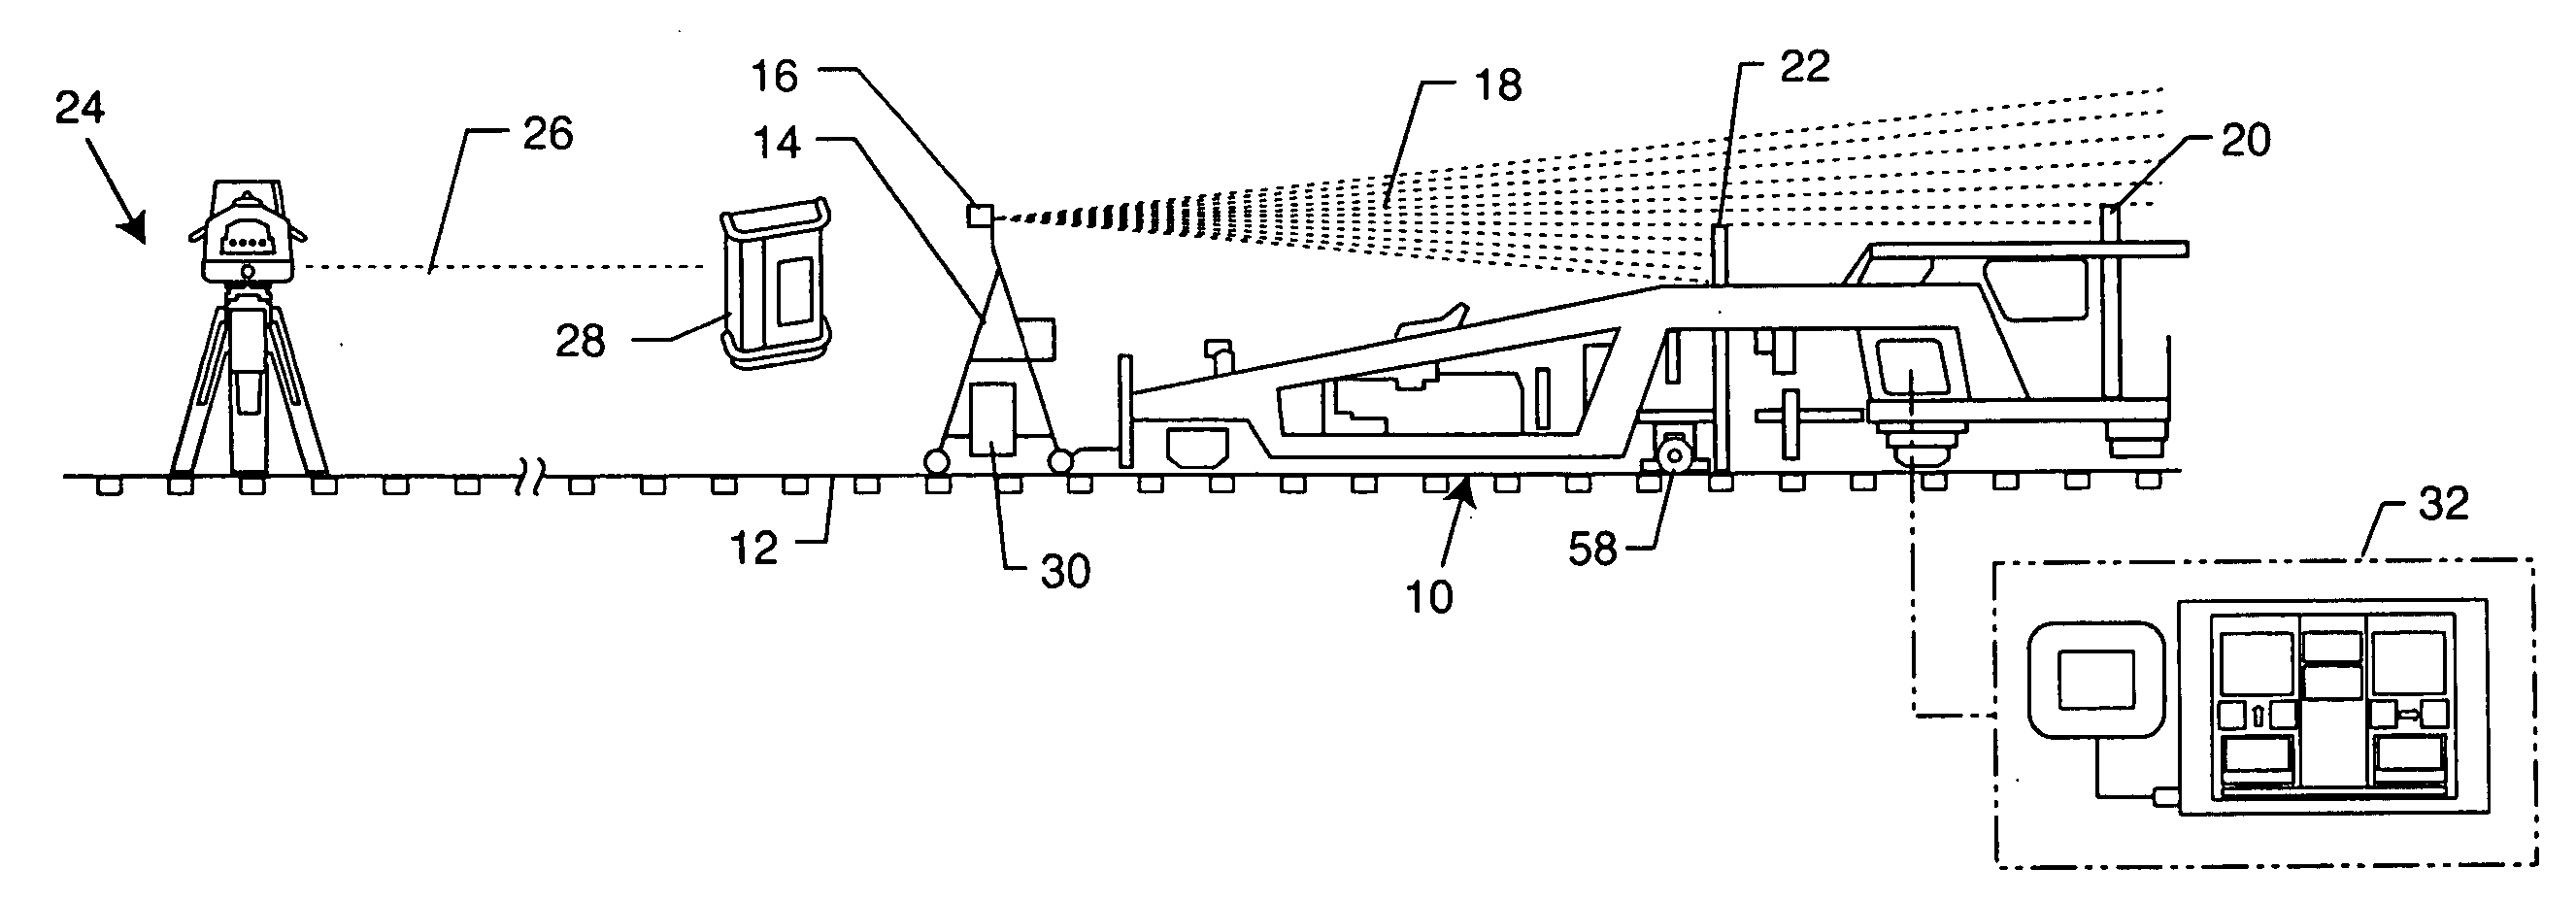 Method and system for controlling railroad surfacing